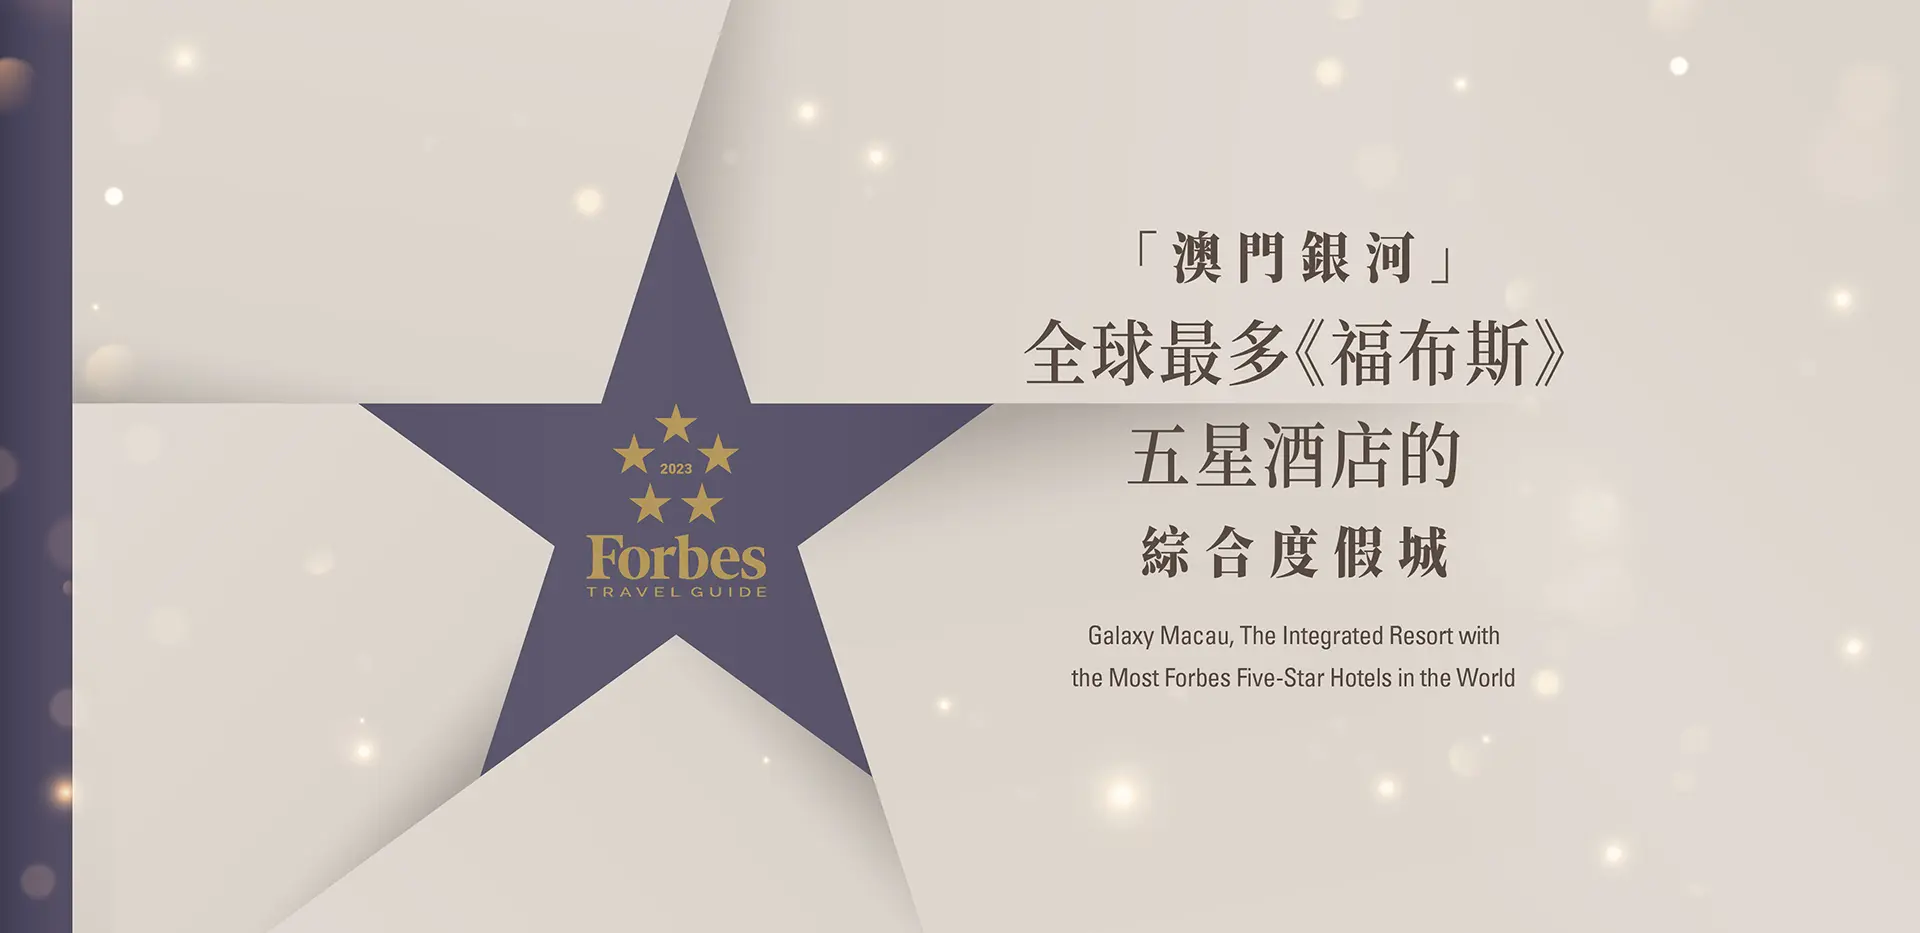 The integrated resort with the most Forbes Five-Star hotels in the world 2023